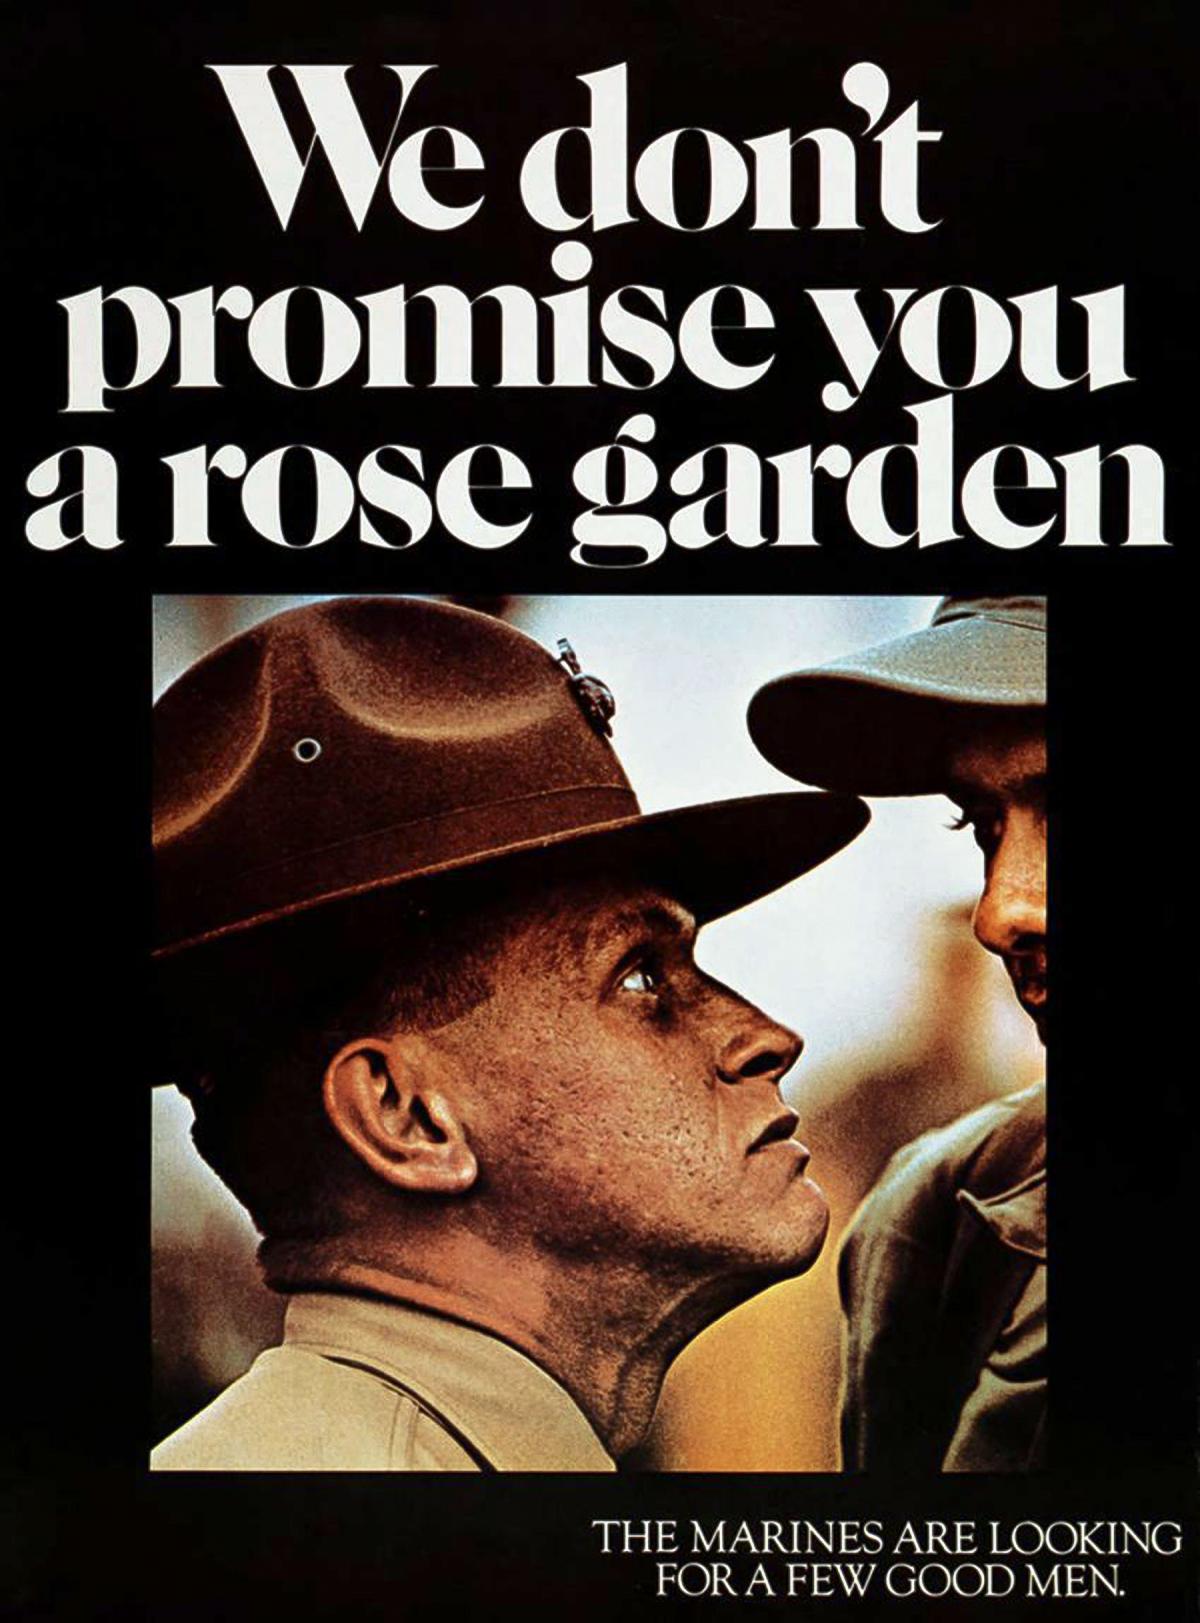 Poster noting "We didn't promise you a rose garden, the Marines are looking for a few good men."